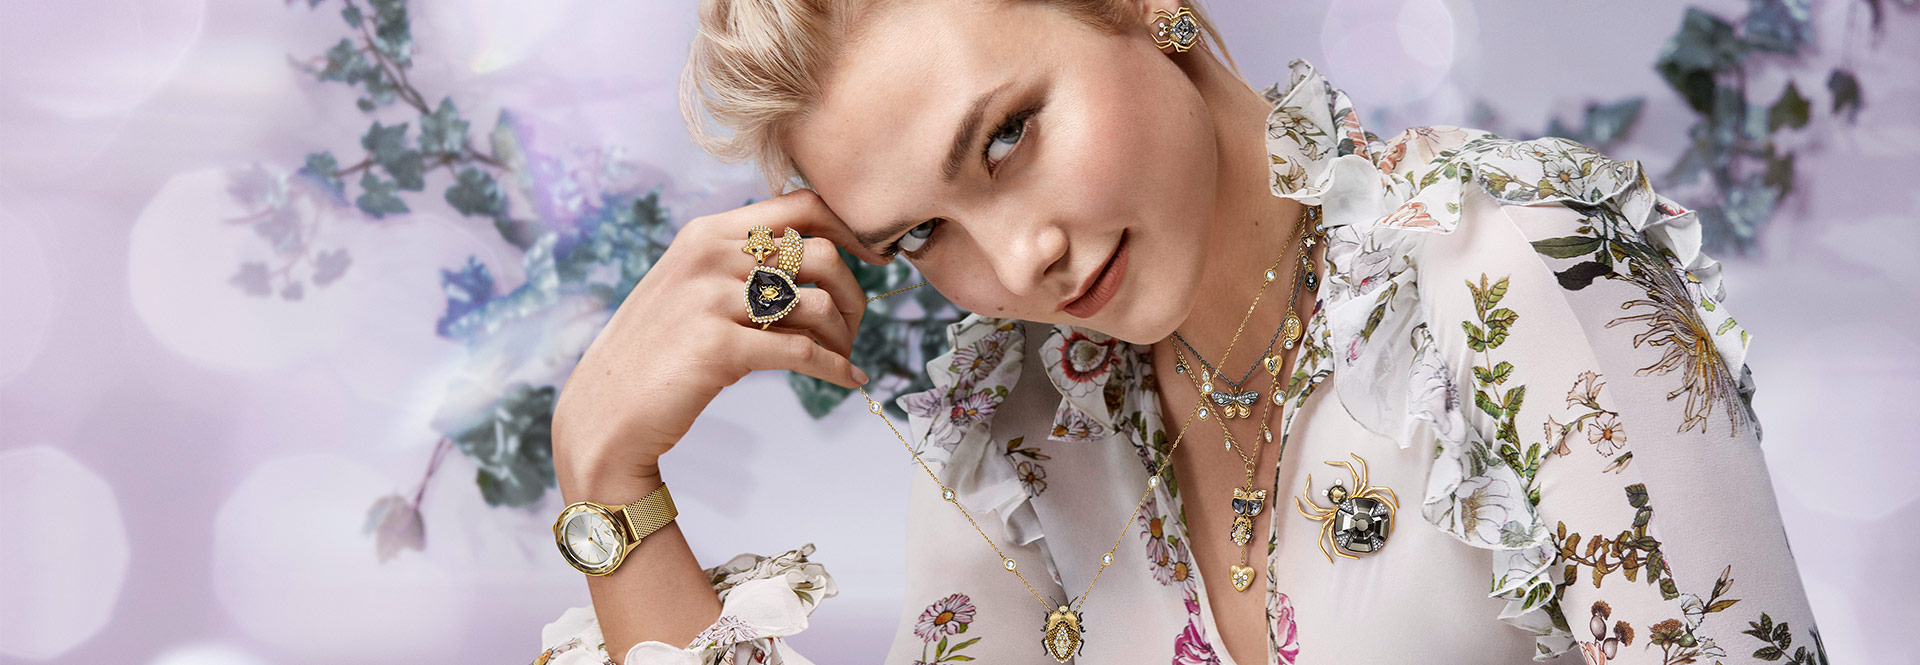 New Winter Collection Swarovski introduces Tales of the Forest, a mystical winter collection of nature-inspired jewelry.